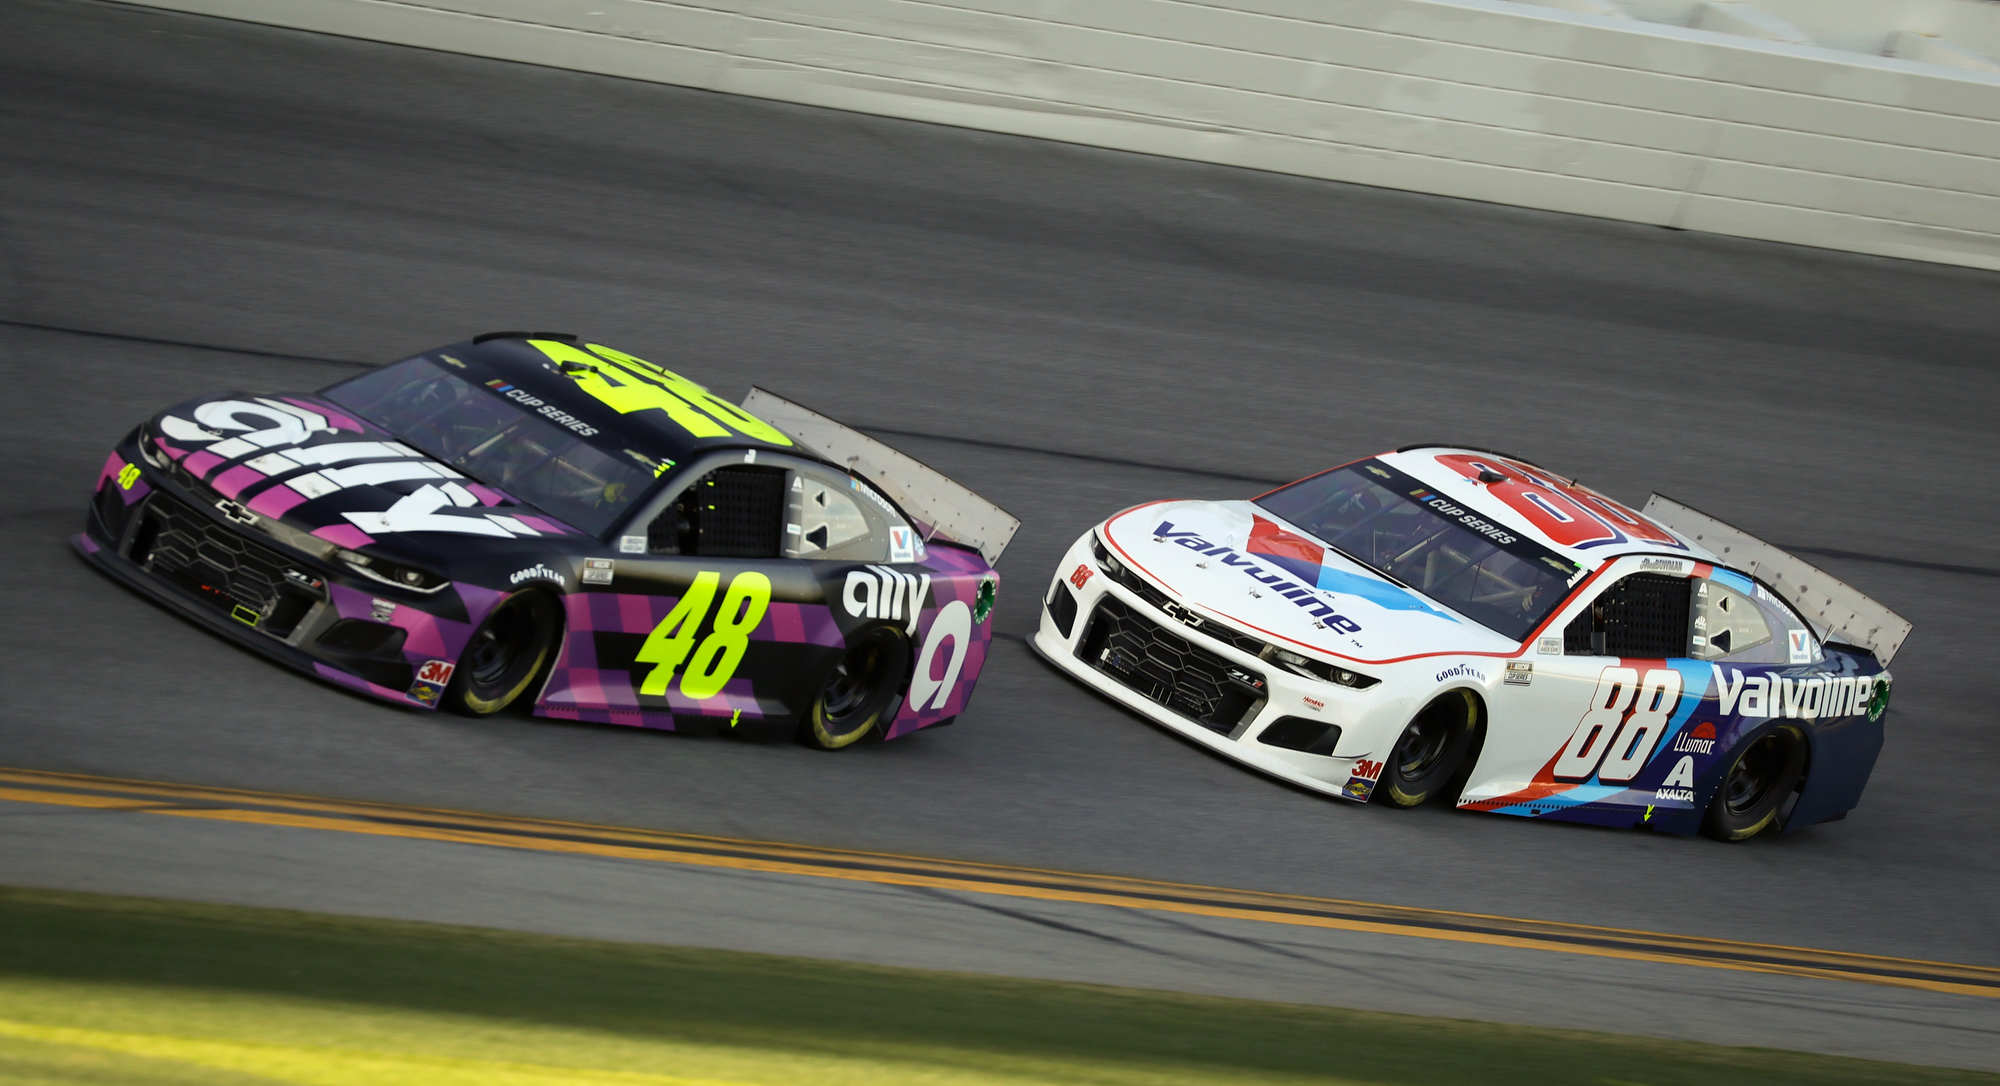 Jimmie Johnson got taken out of his last Daytona in a wreck caused by Joey Logano